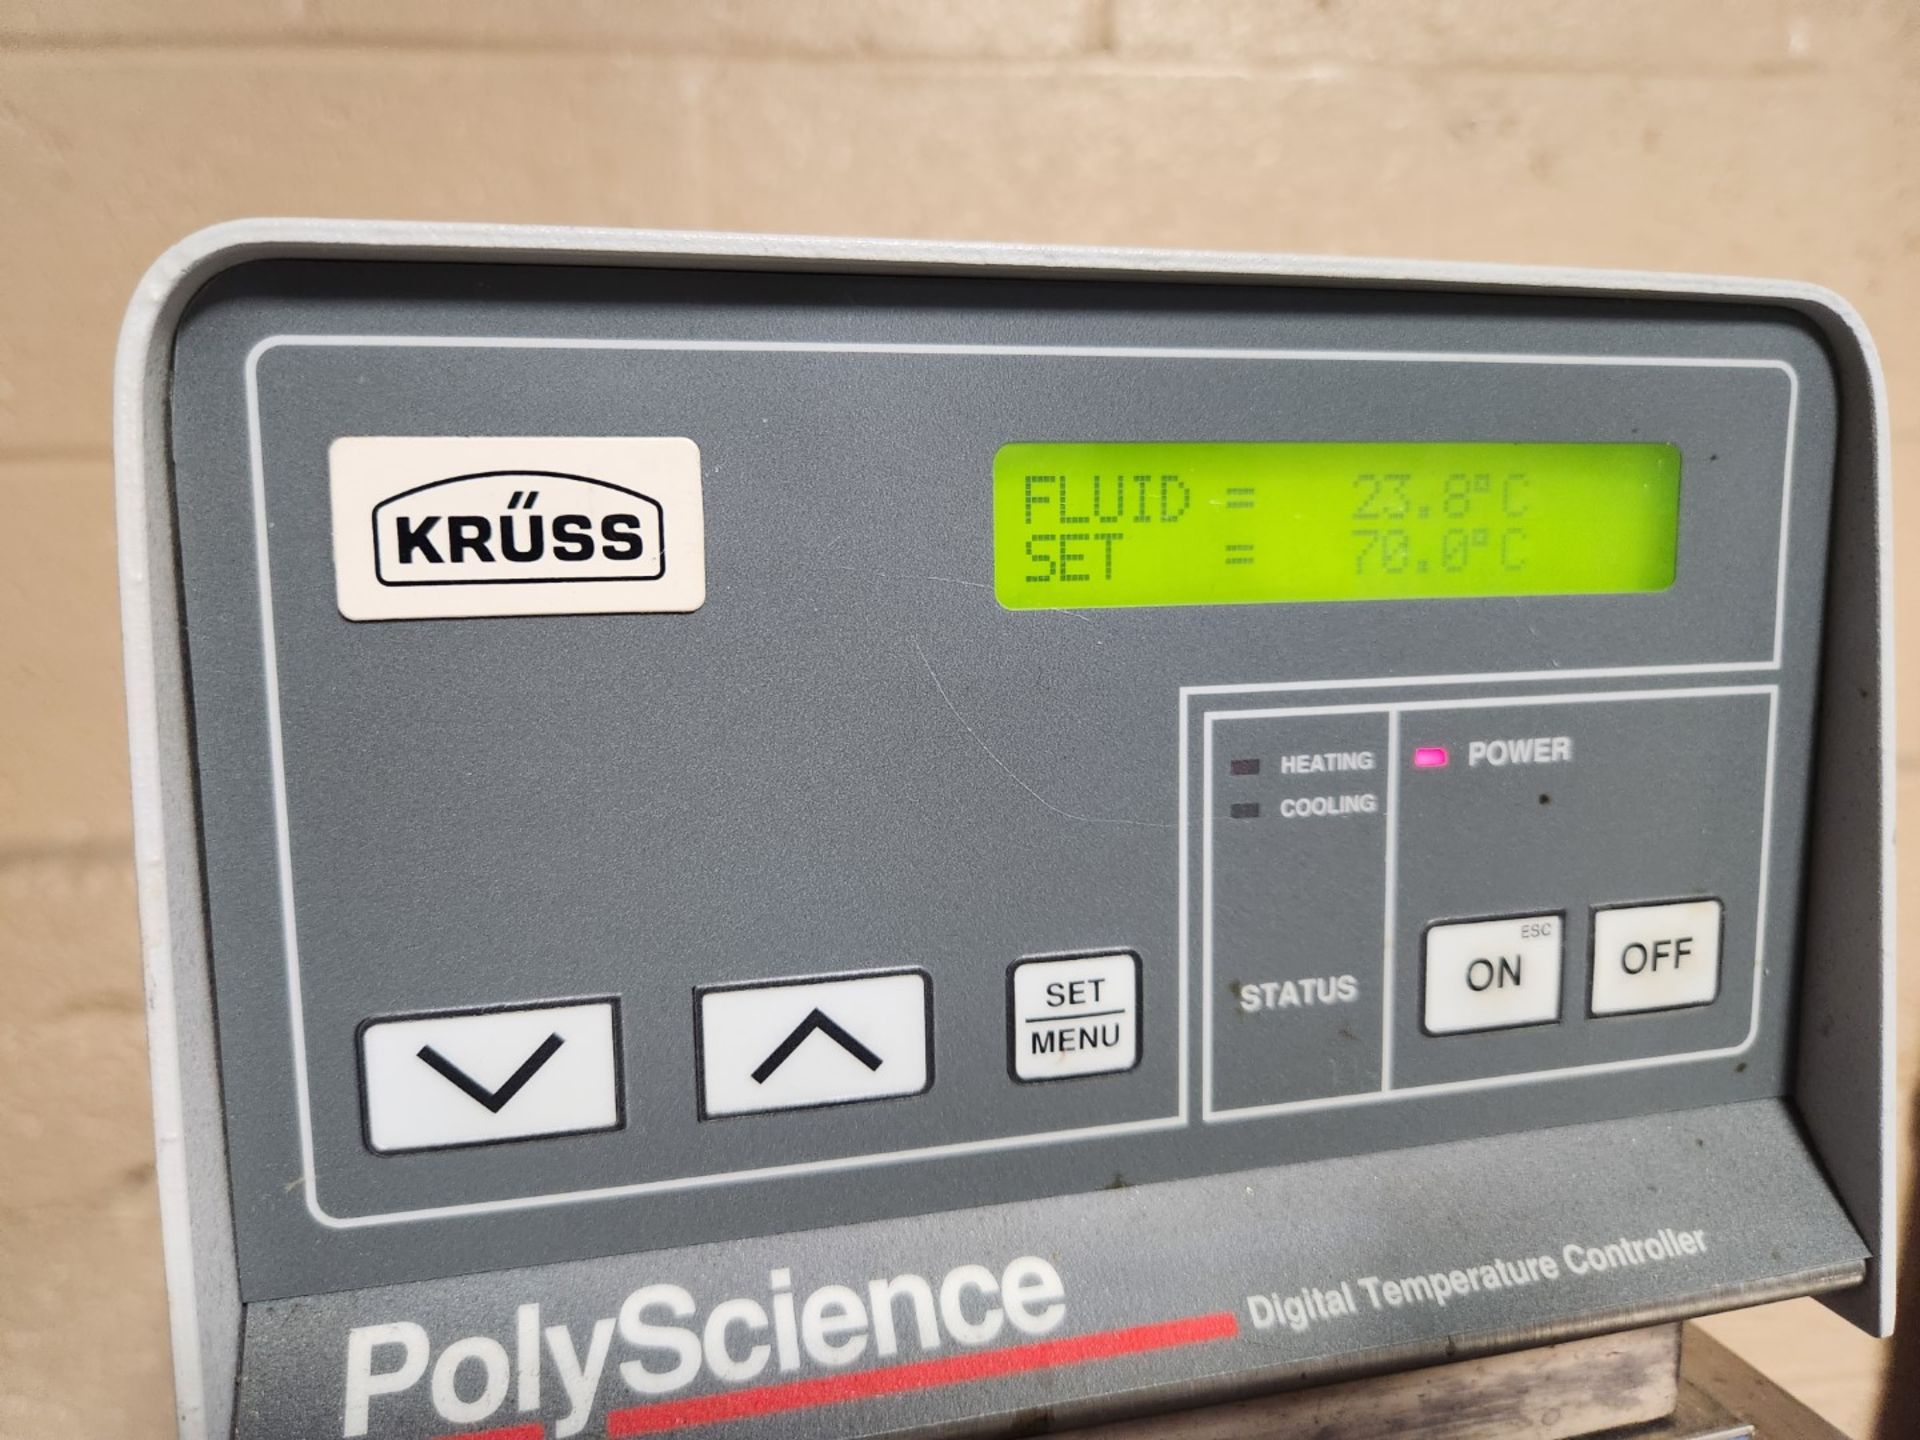 Kruss PolyScience digital temperature controller, model 9101, 120 volts, serial# 504417. (TAG # - Image 4 of 5